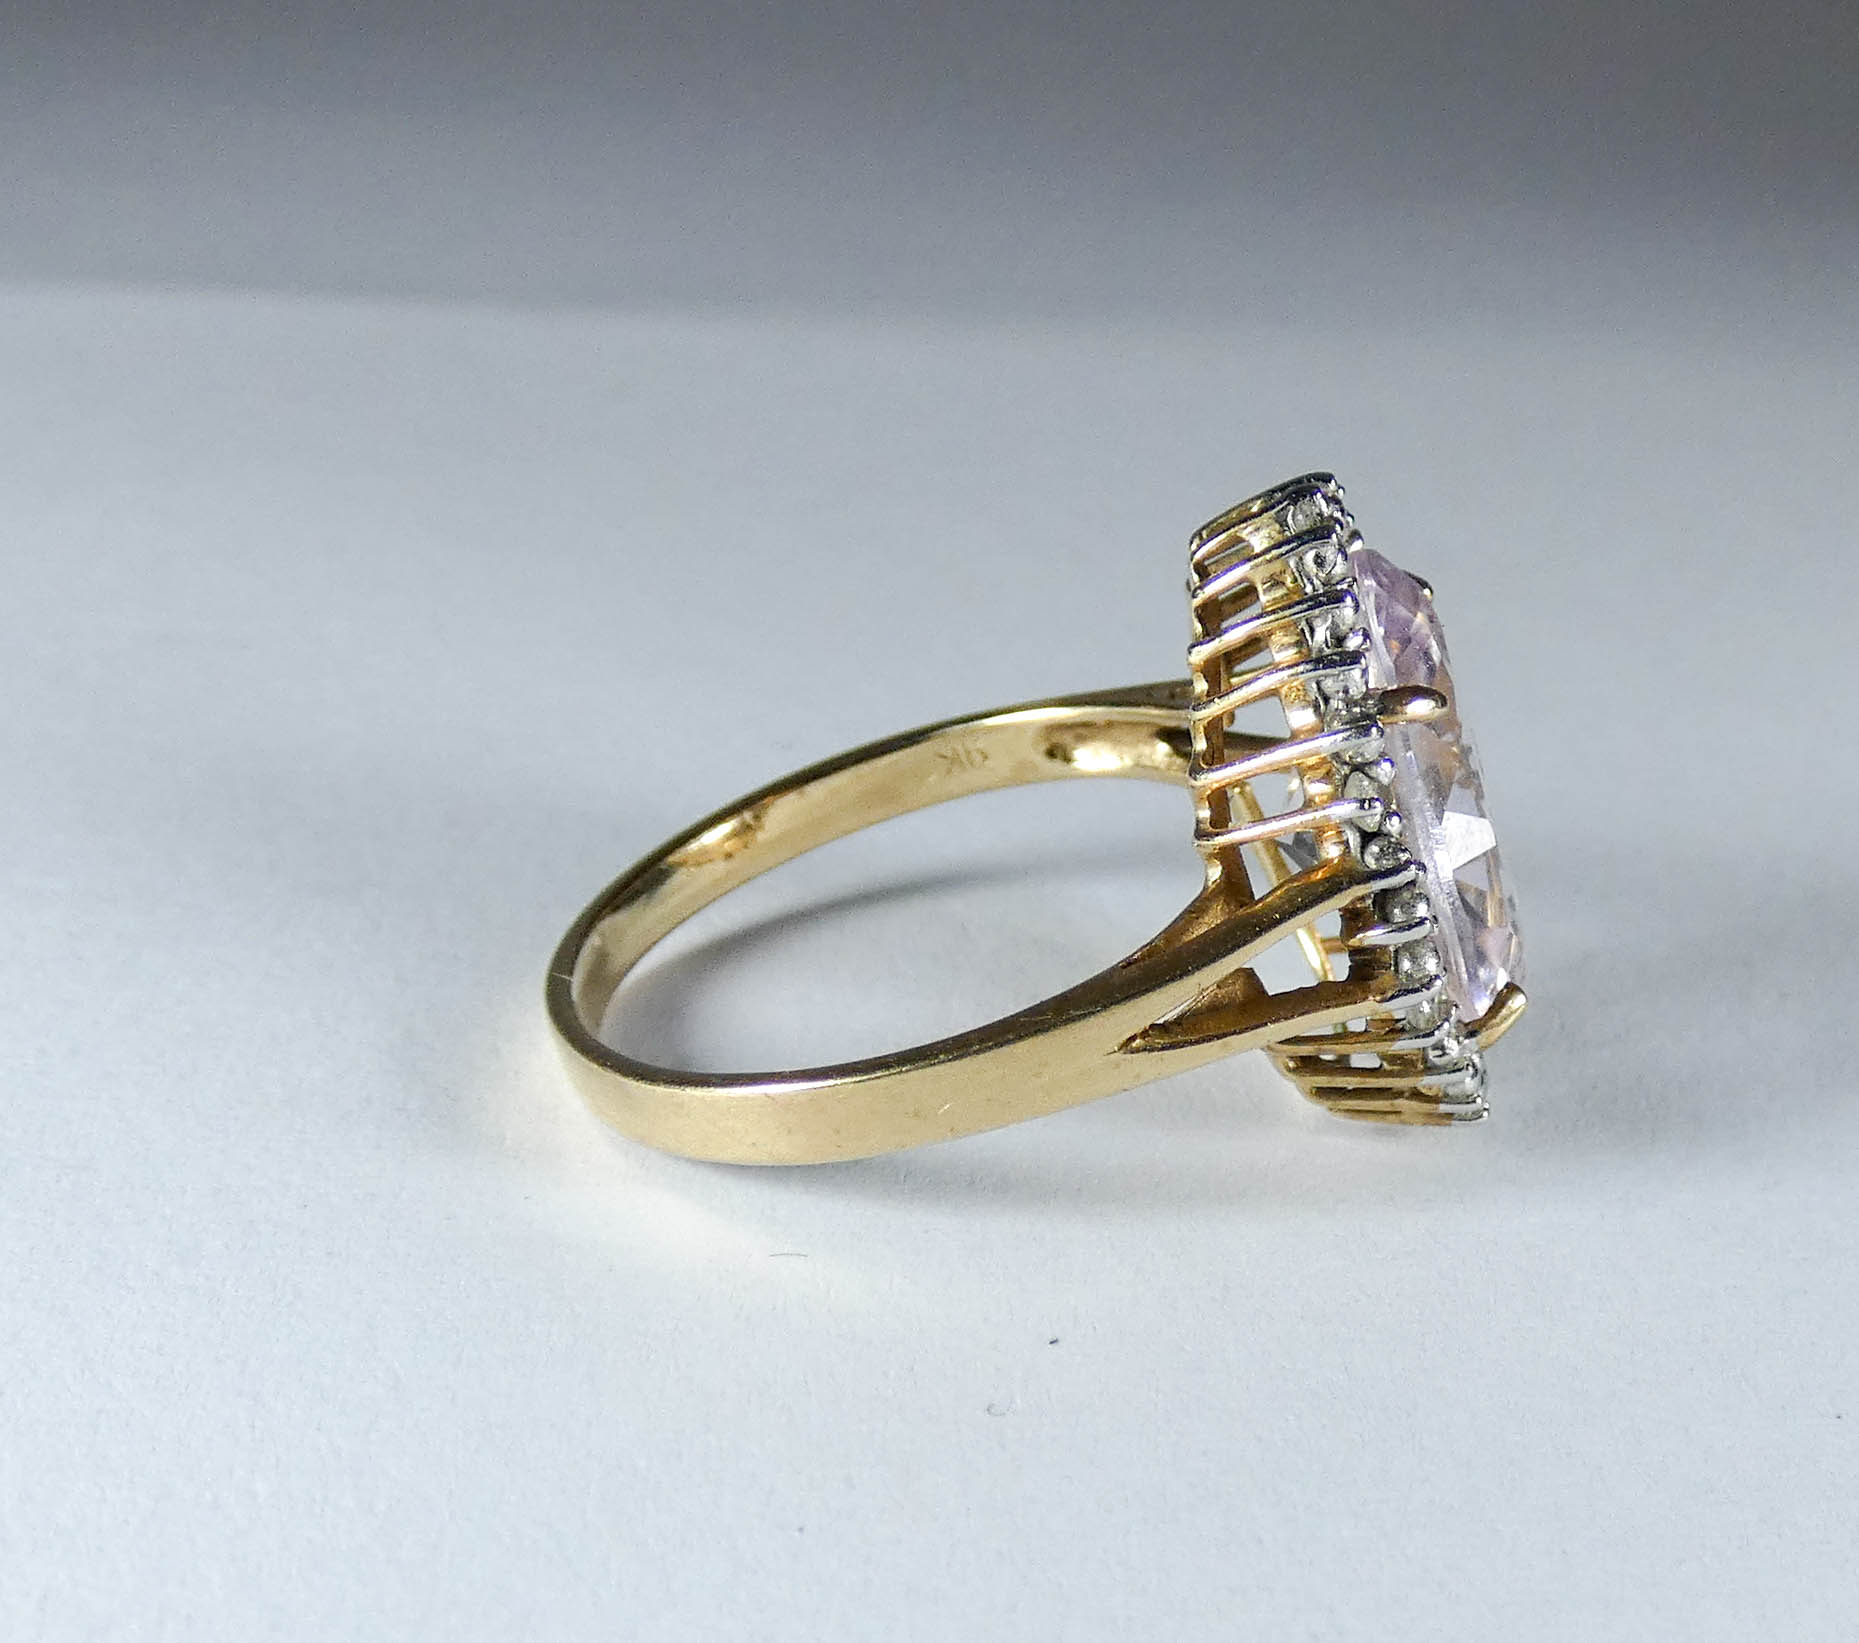 9ct gold ladies dress ring set with a large oval kunzite or pale amethyst, - Image 3 of 4